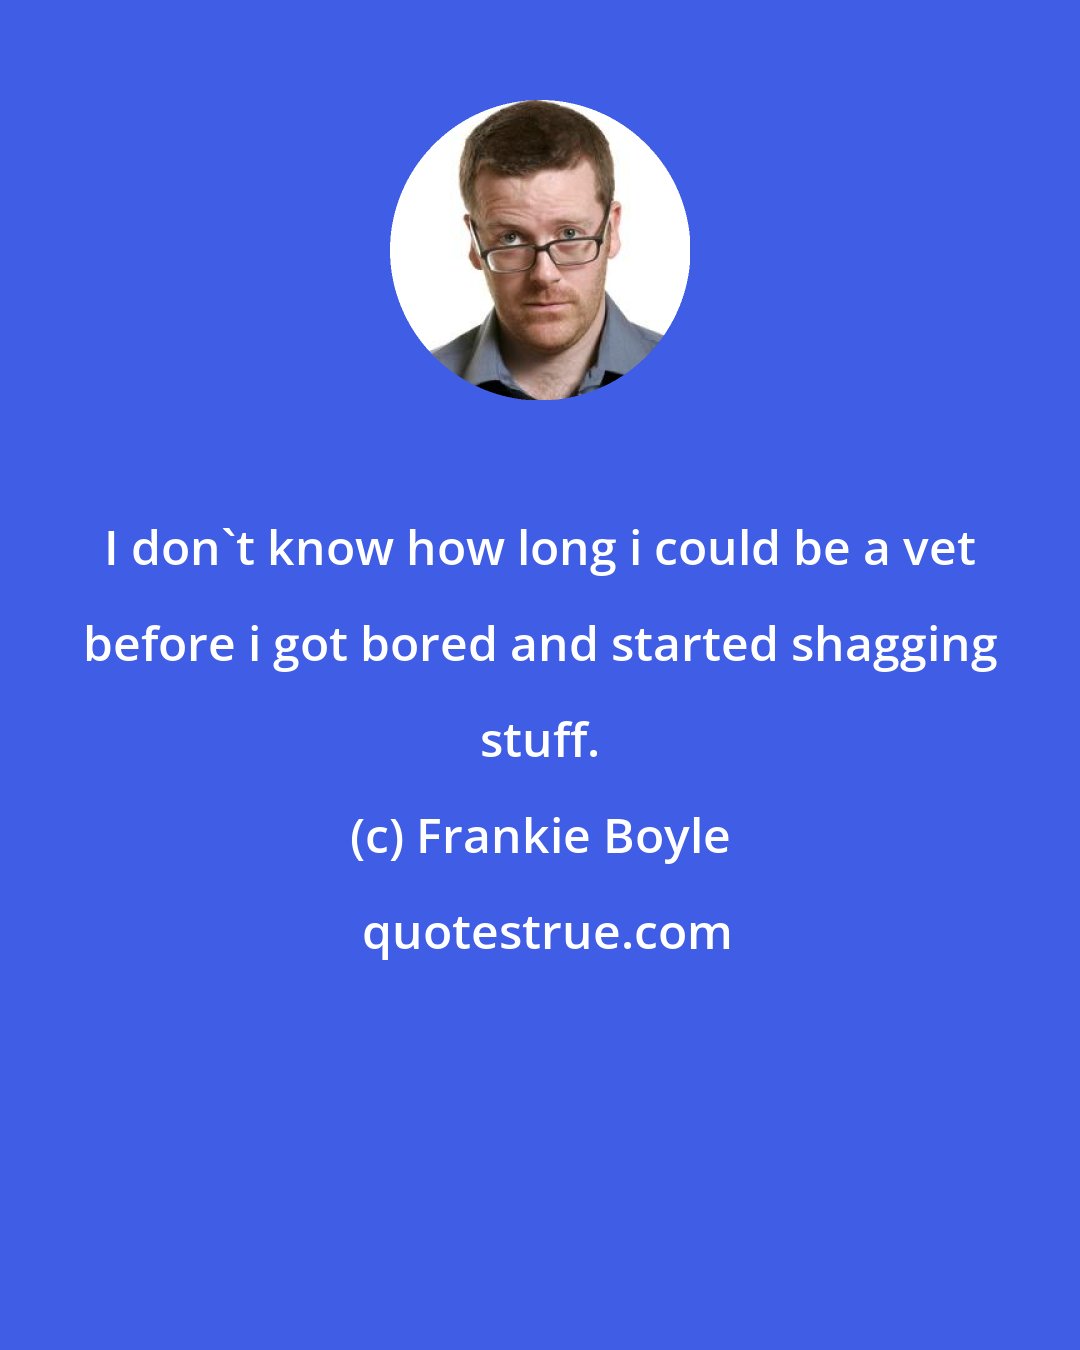 Frankie Boyle: I don't know how long i could be a vet before i got bored and started shagging stuff.